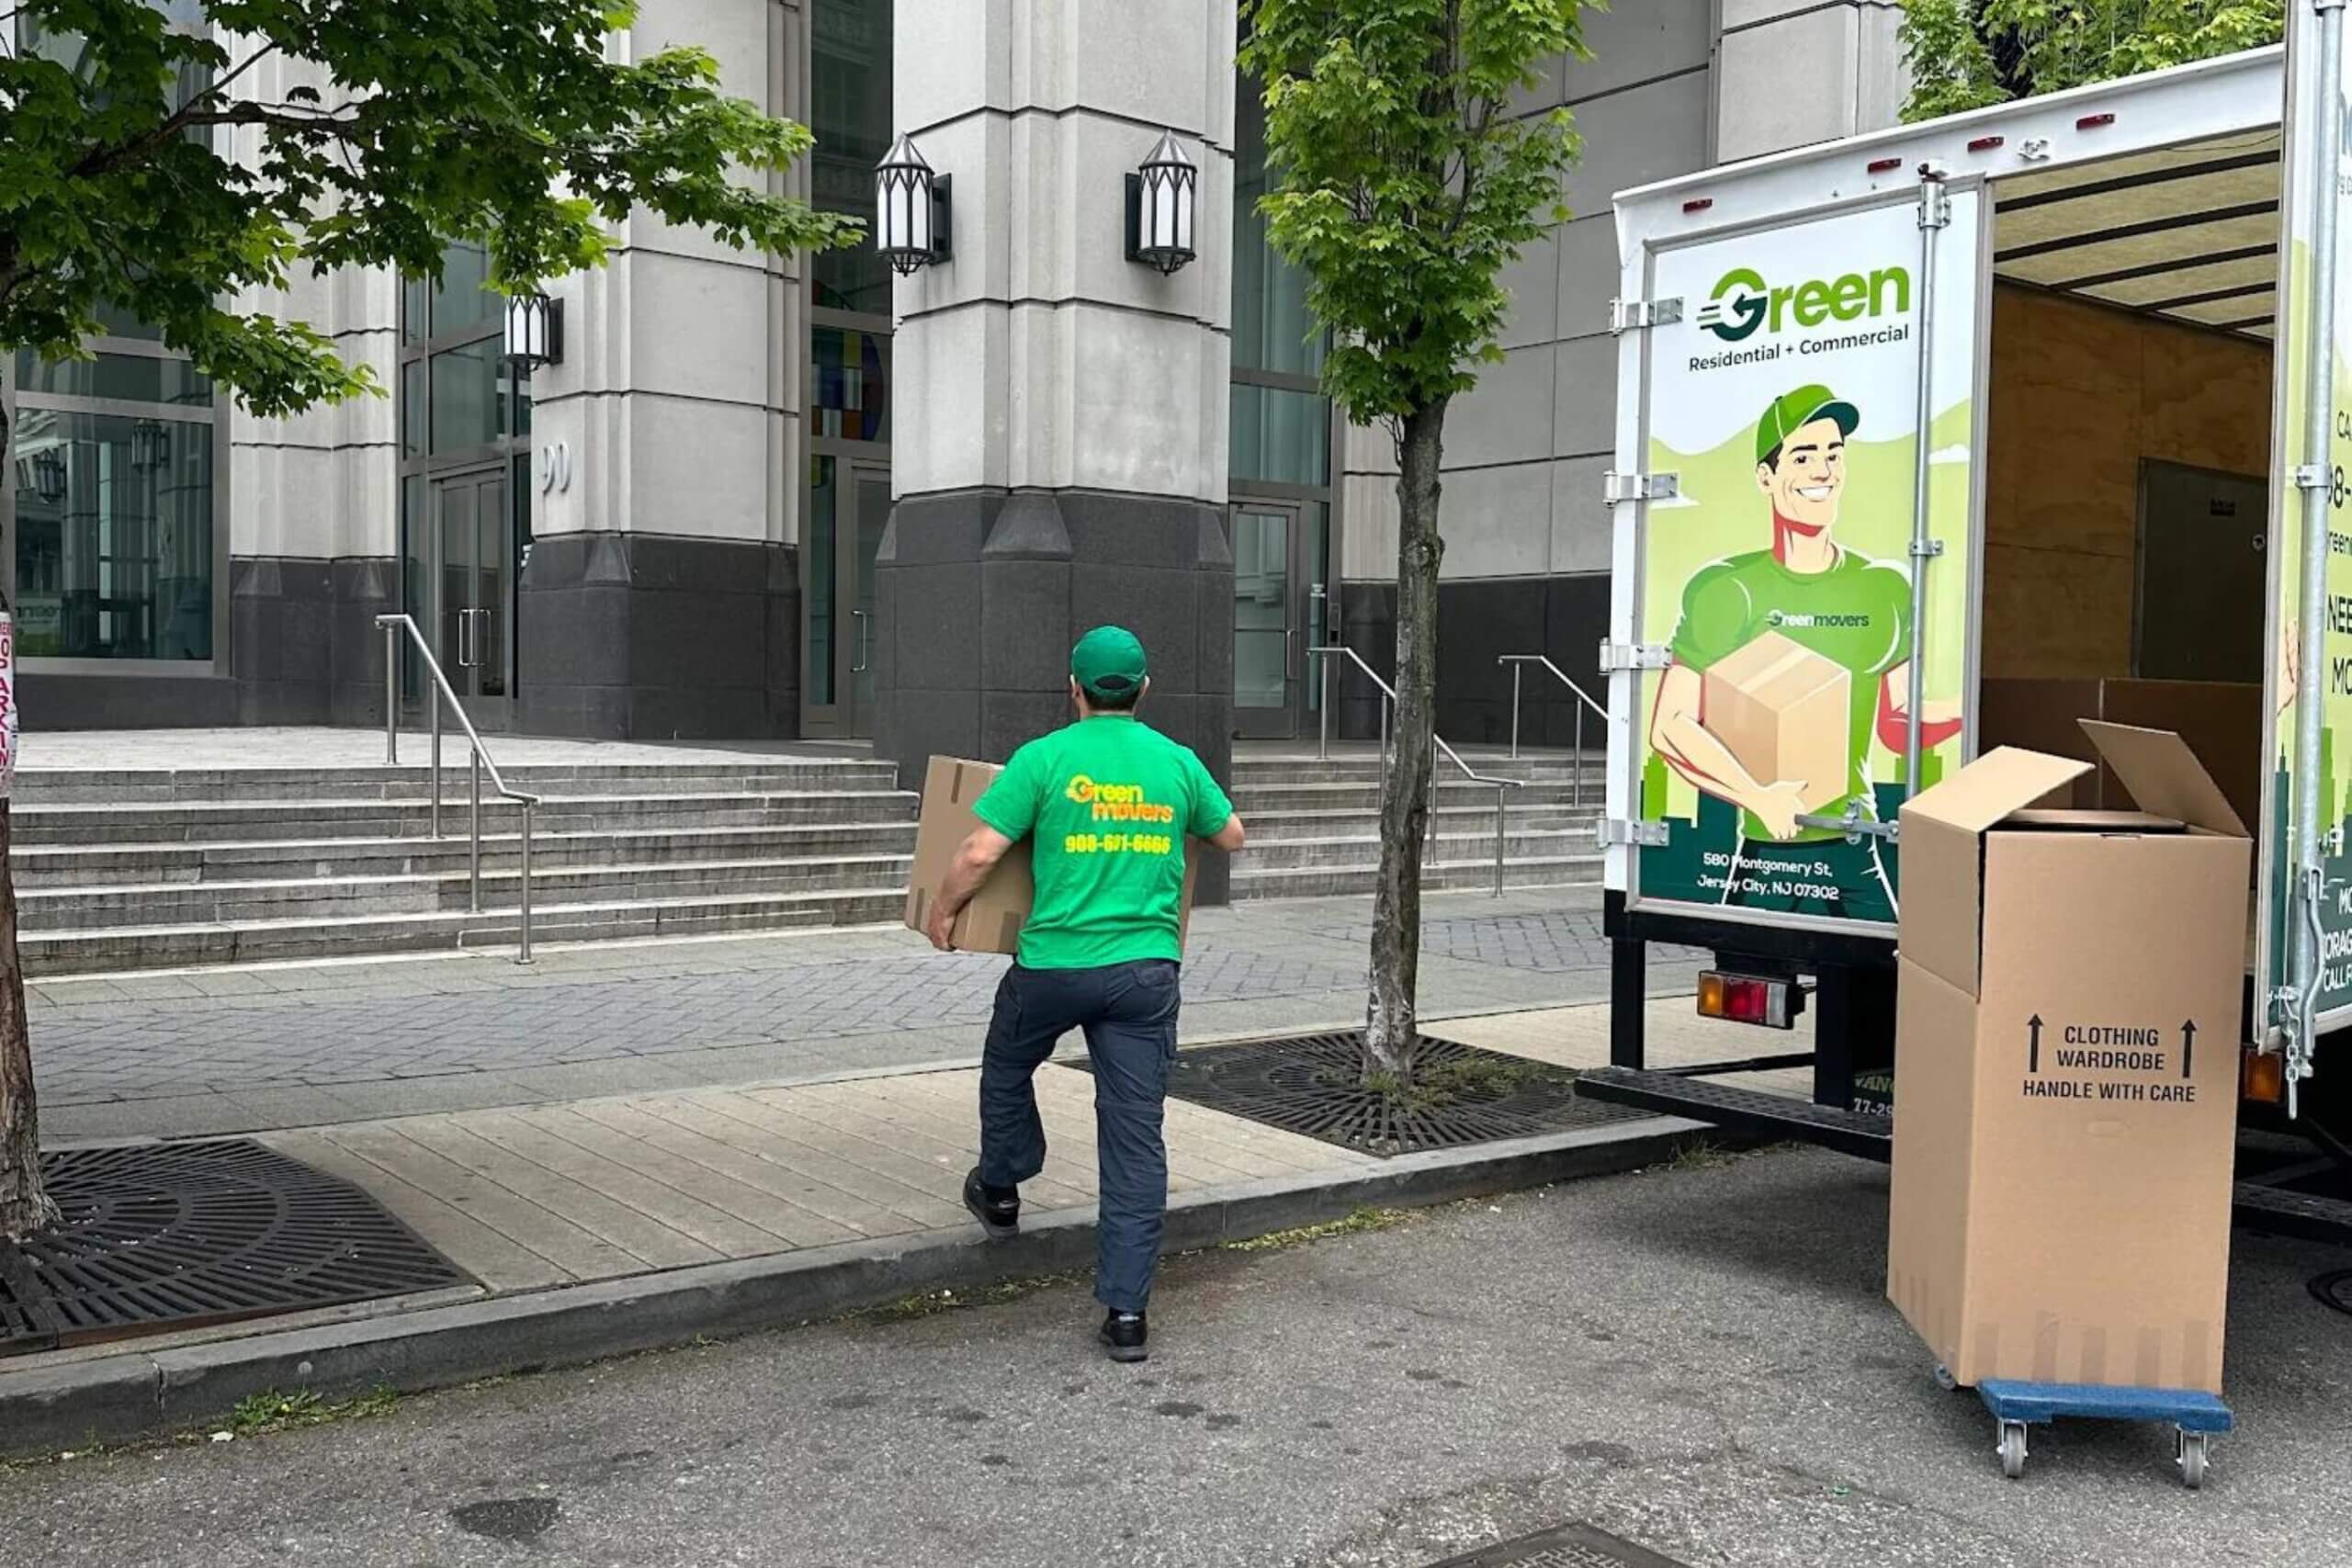 Your search for reliable moving company in Secaucus is over with Green movers. Green Movers is a top-rated moving company in NJ.